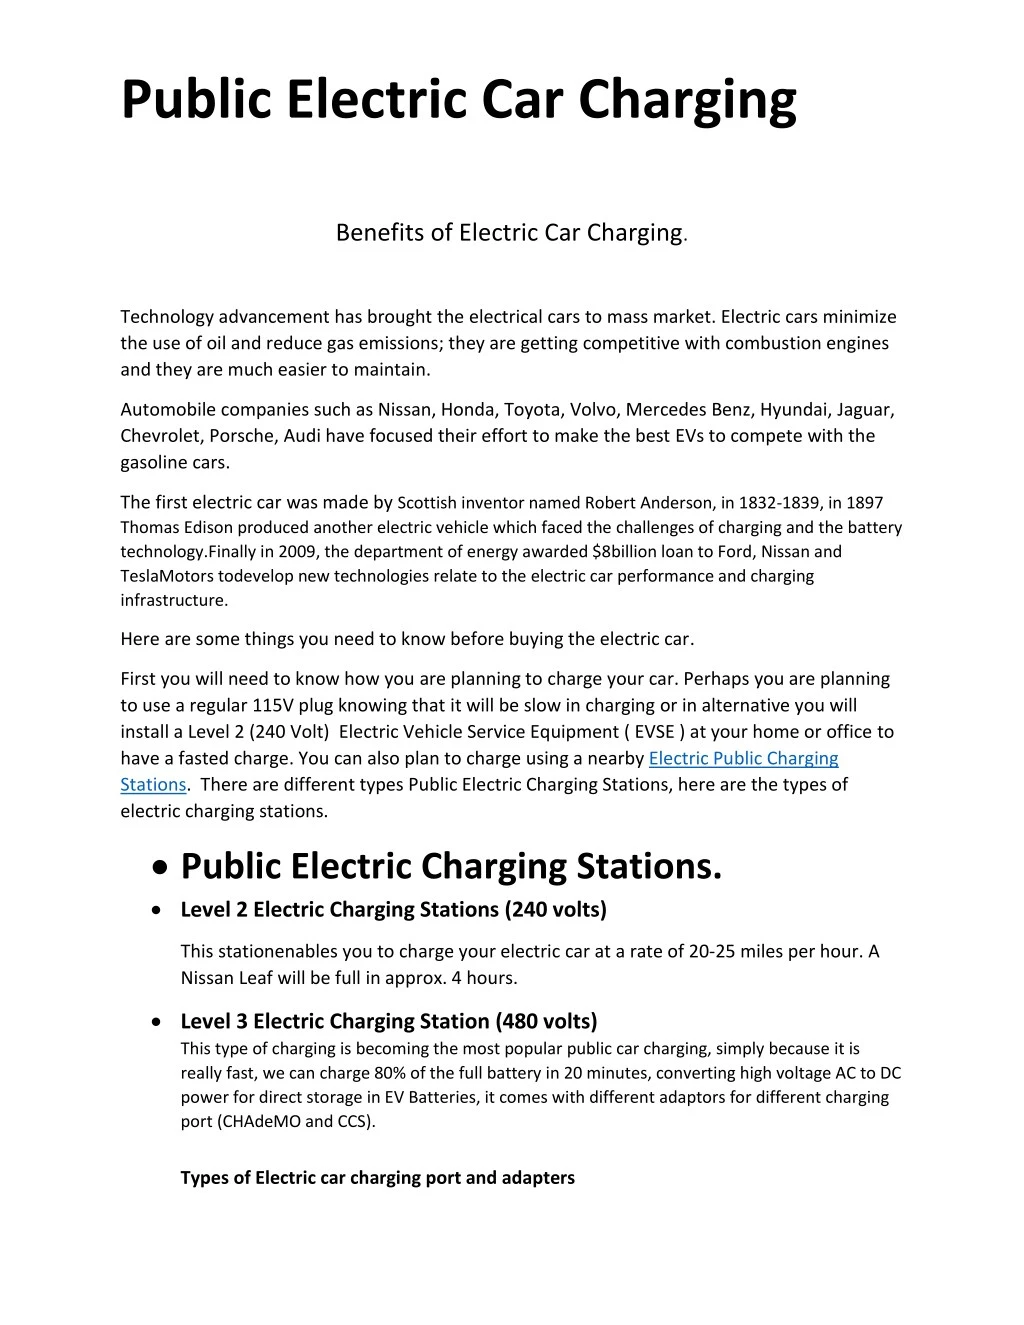 PPT Benefits of Electric Car Charging PowerPoint Presentation, free